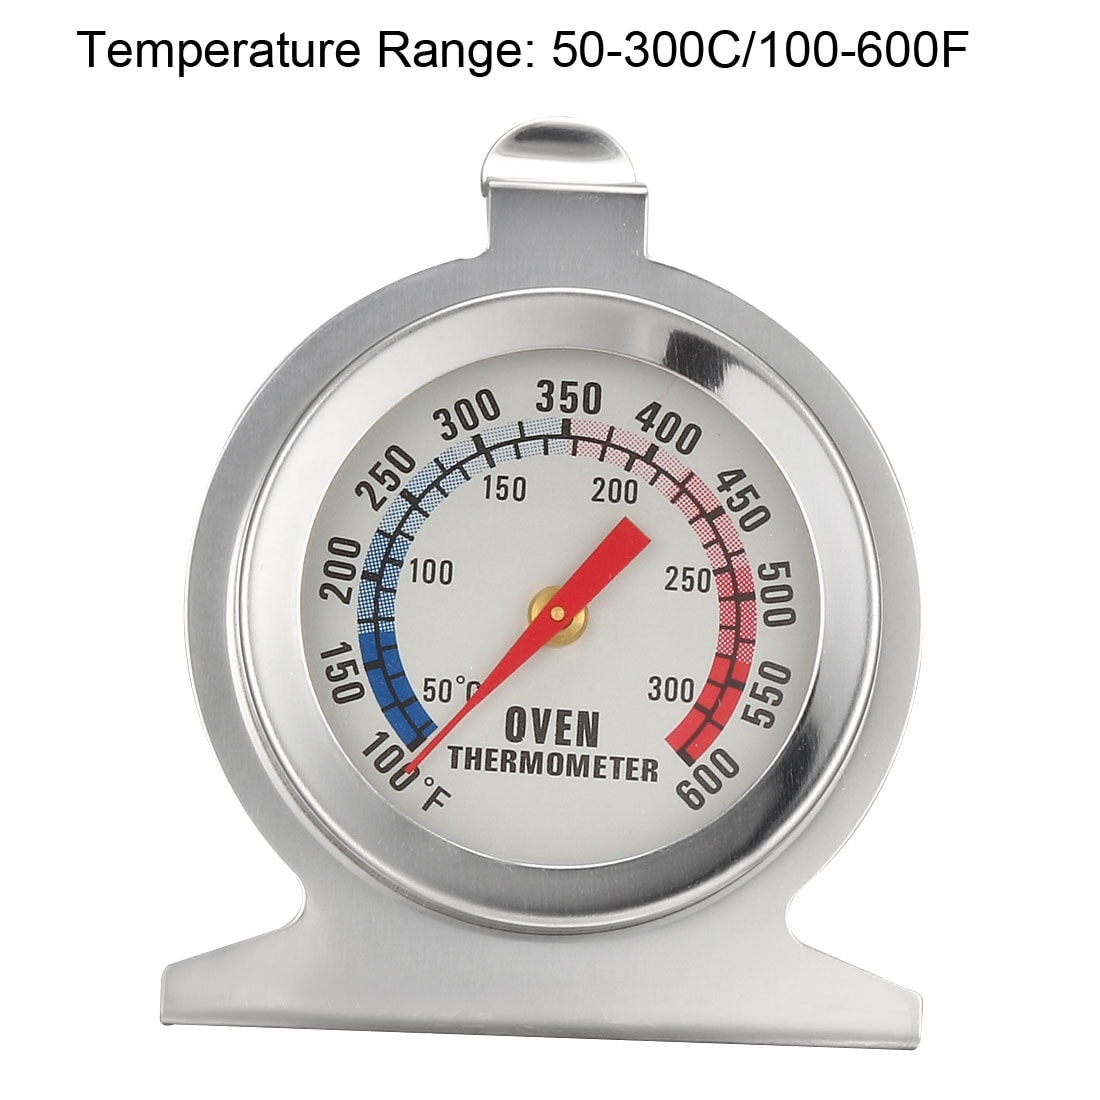 https://ak1.ostkcdn.com/images/products/is/images/direct/17de5f71d2f36f81cf9dcb2d2baa722e92804f5e/Oven-Thermometer-100-600F-Stainless-Steel-Instant-Read-Temperature-Gauge-3pcs.jpg